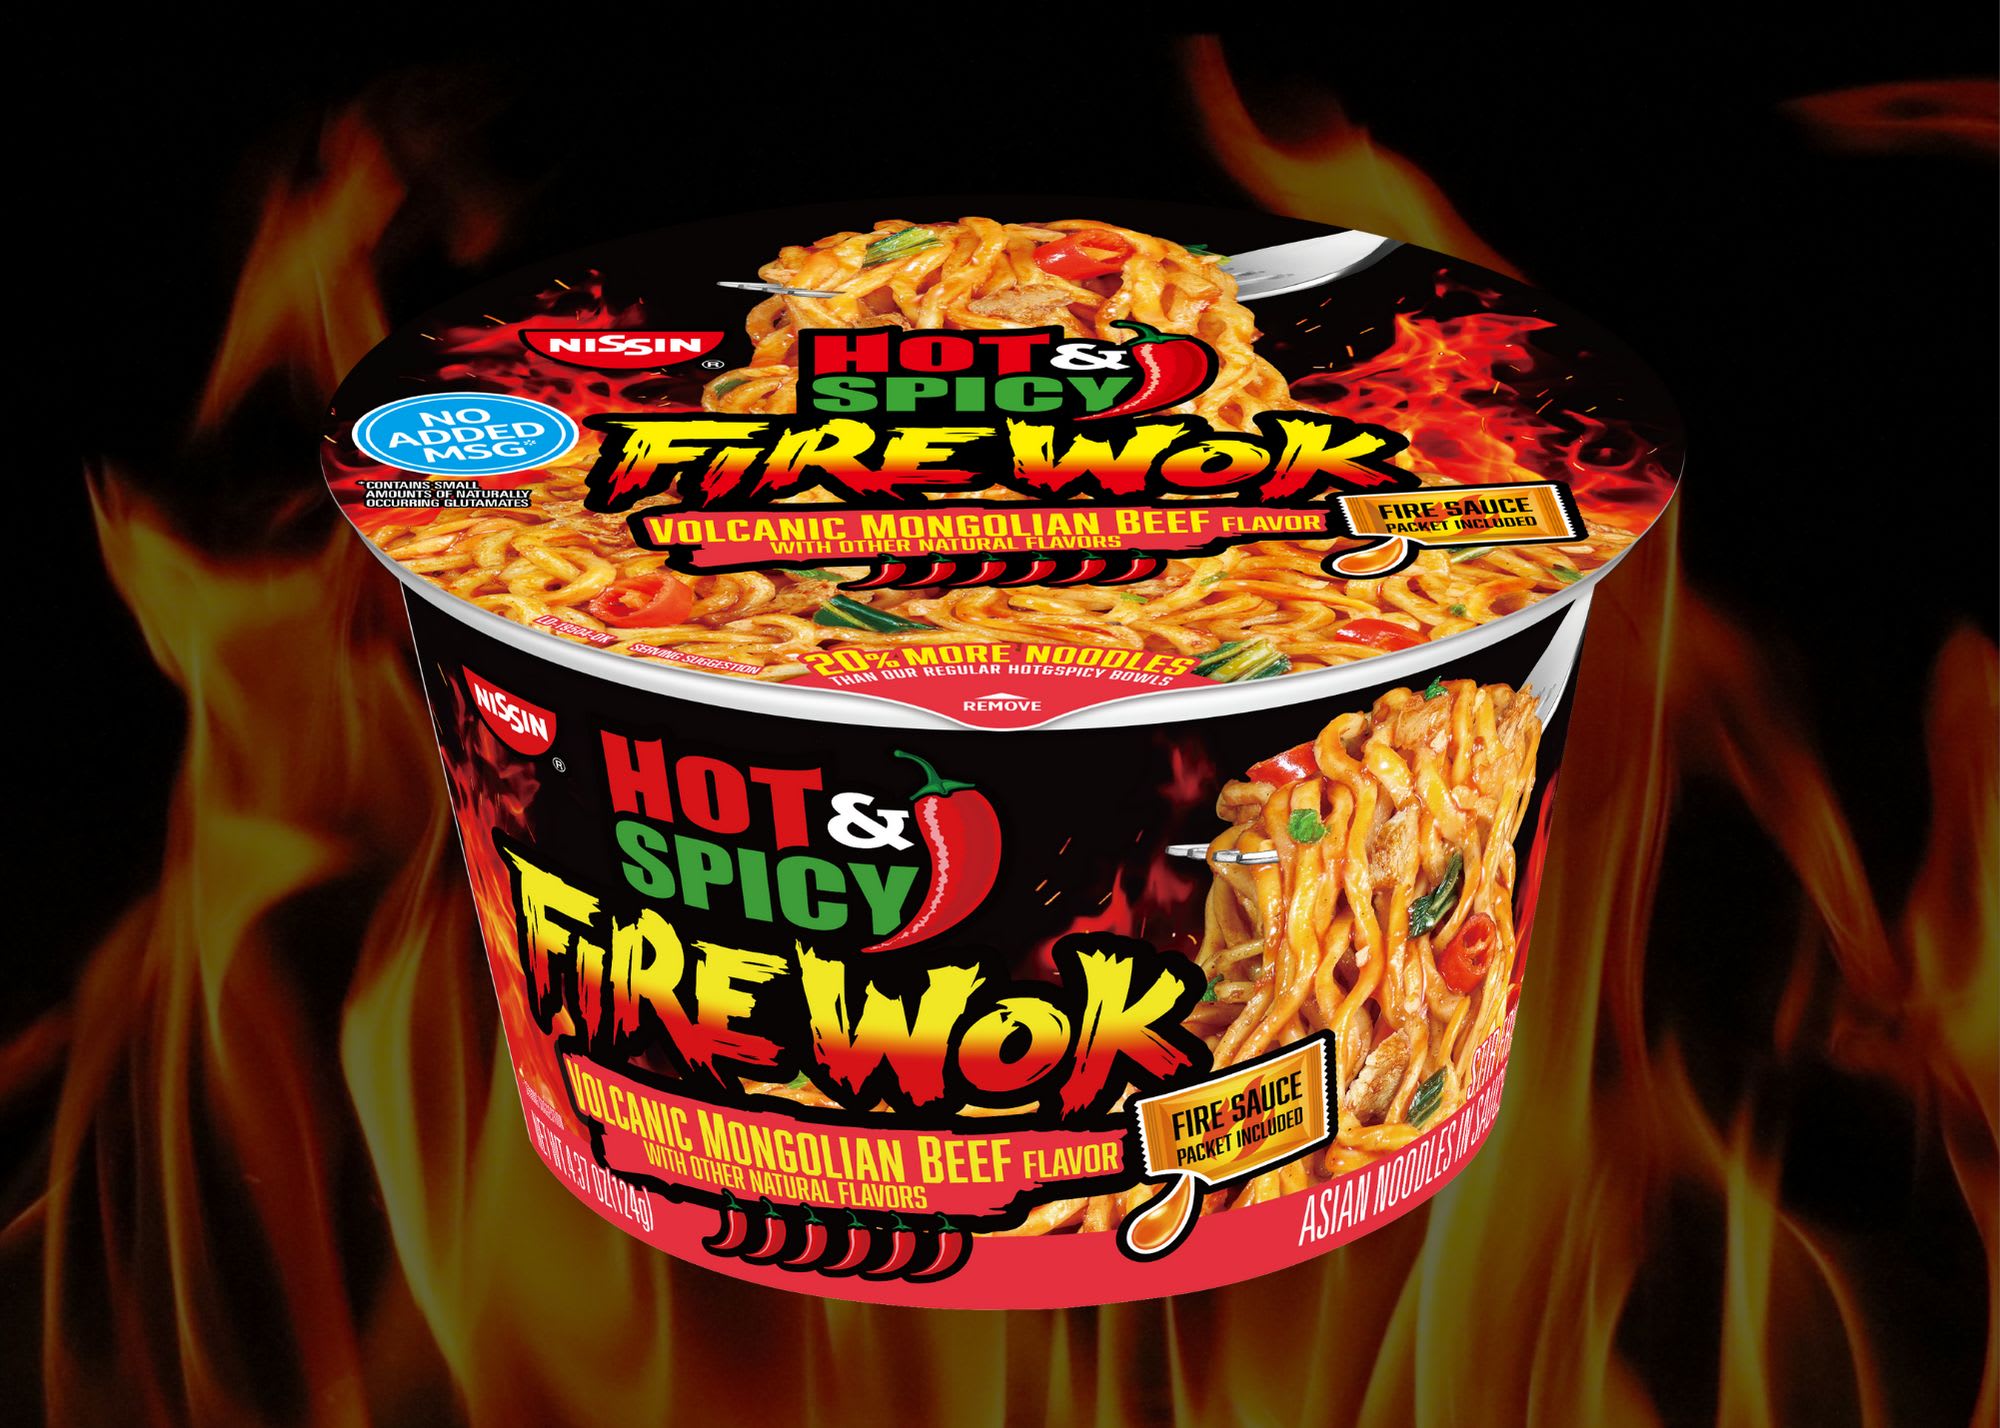 Nissin Foods Hot & Spicy FIRE WOK Volcanic Mongolian Beef savors the in...